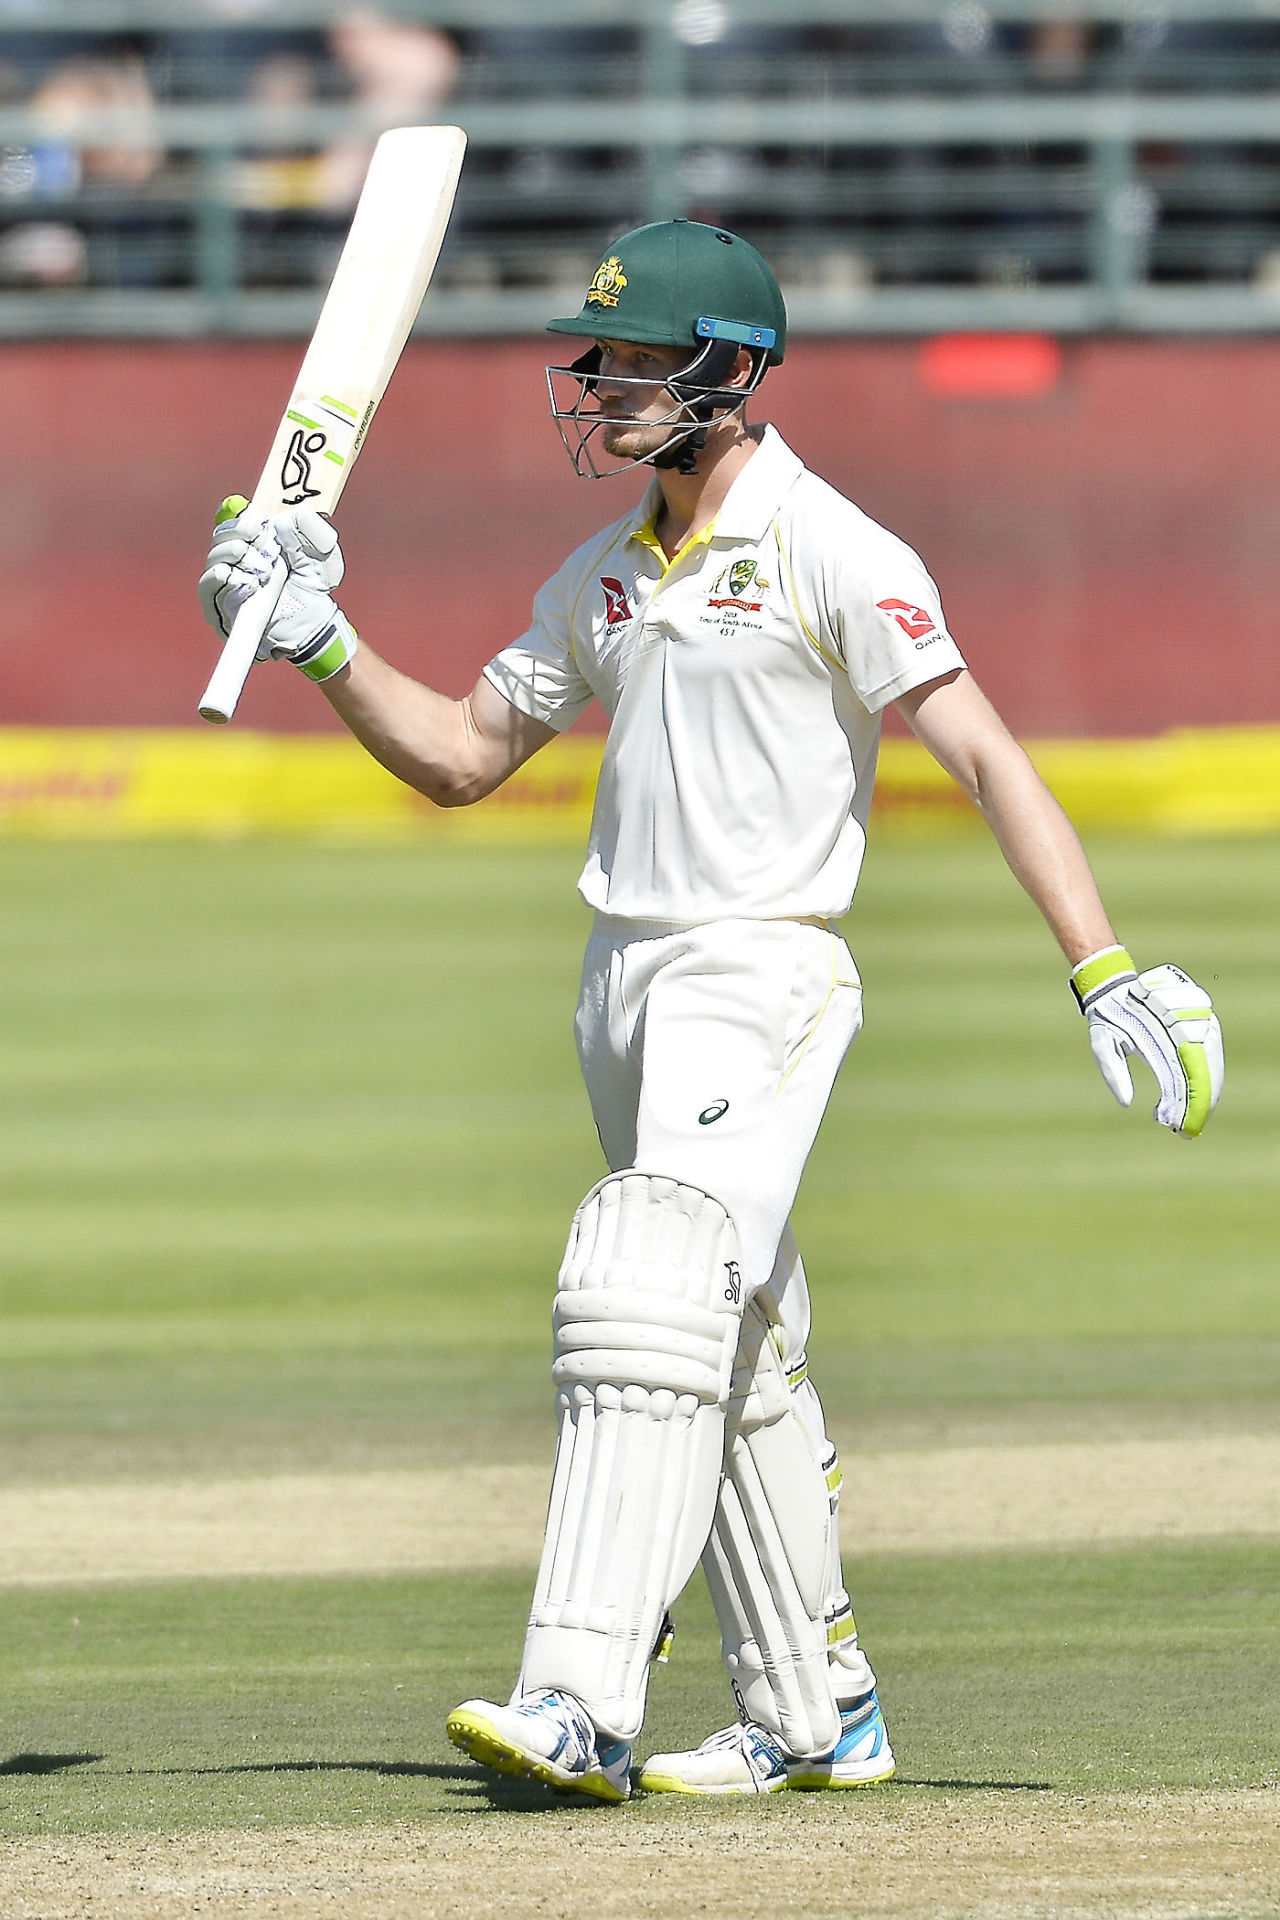 Camerson Bancroft anchored Australia's innings with a fighting fifty, South Africa v Australia, 3rd Test, Cape Town, 2nd day, March 23, 2018